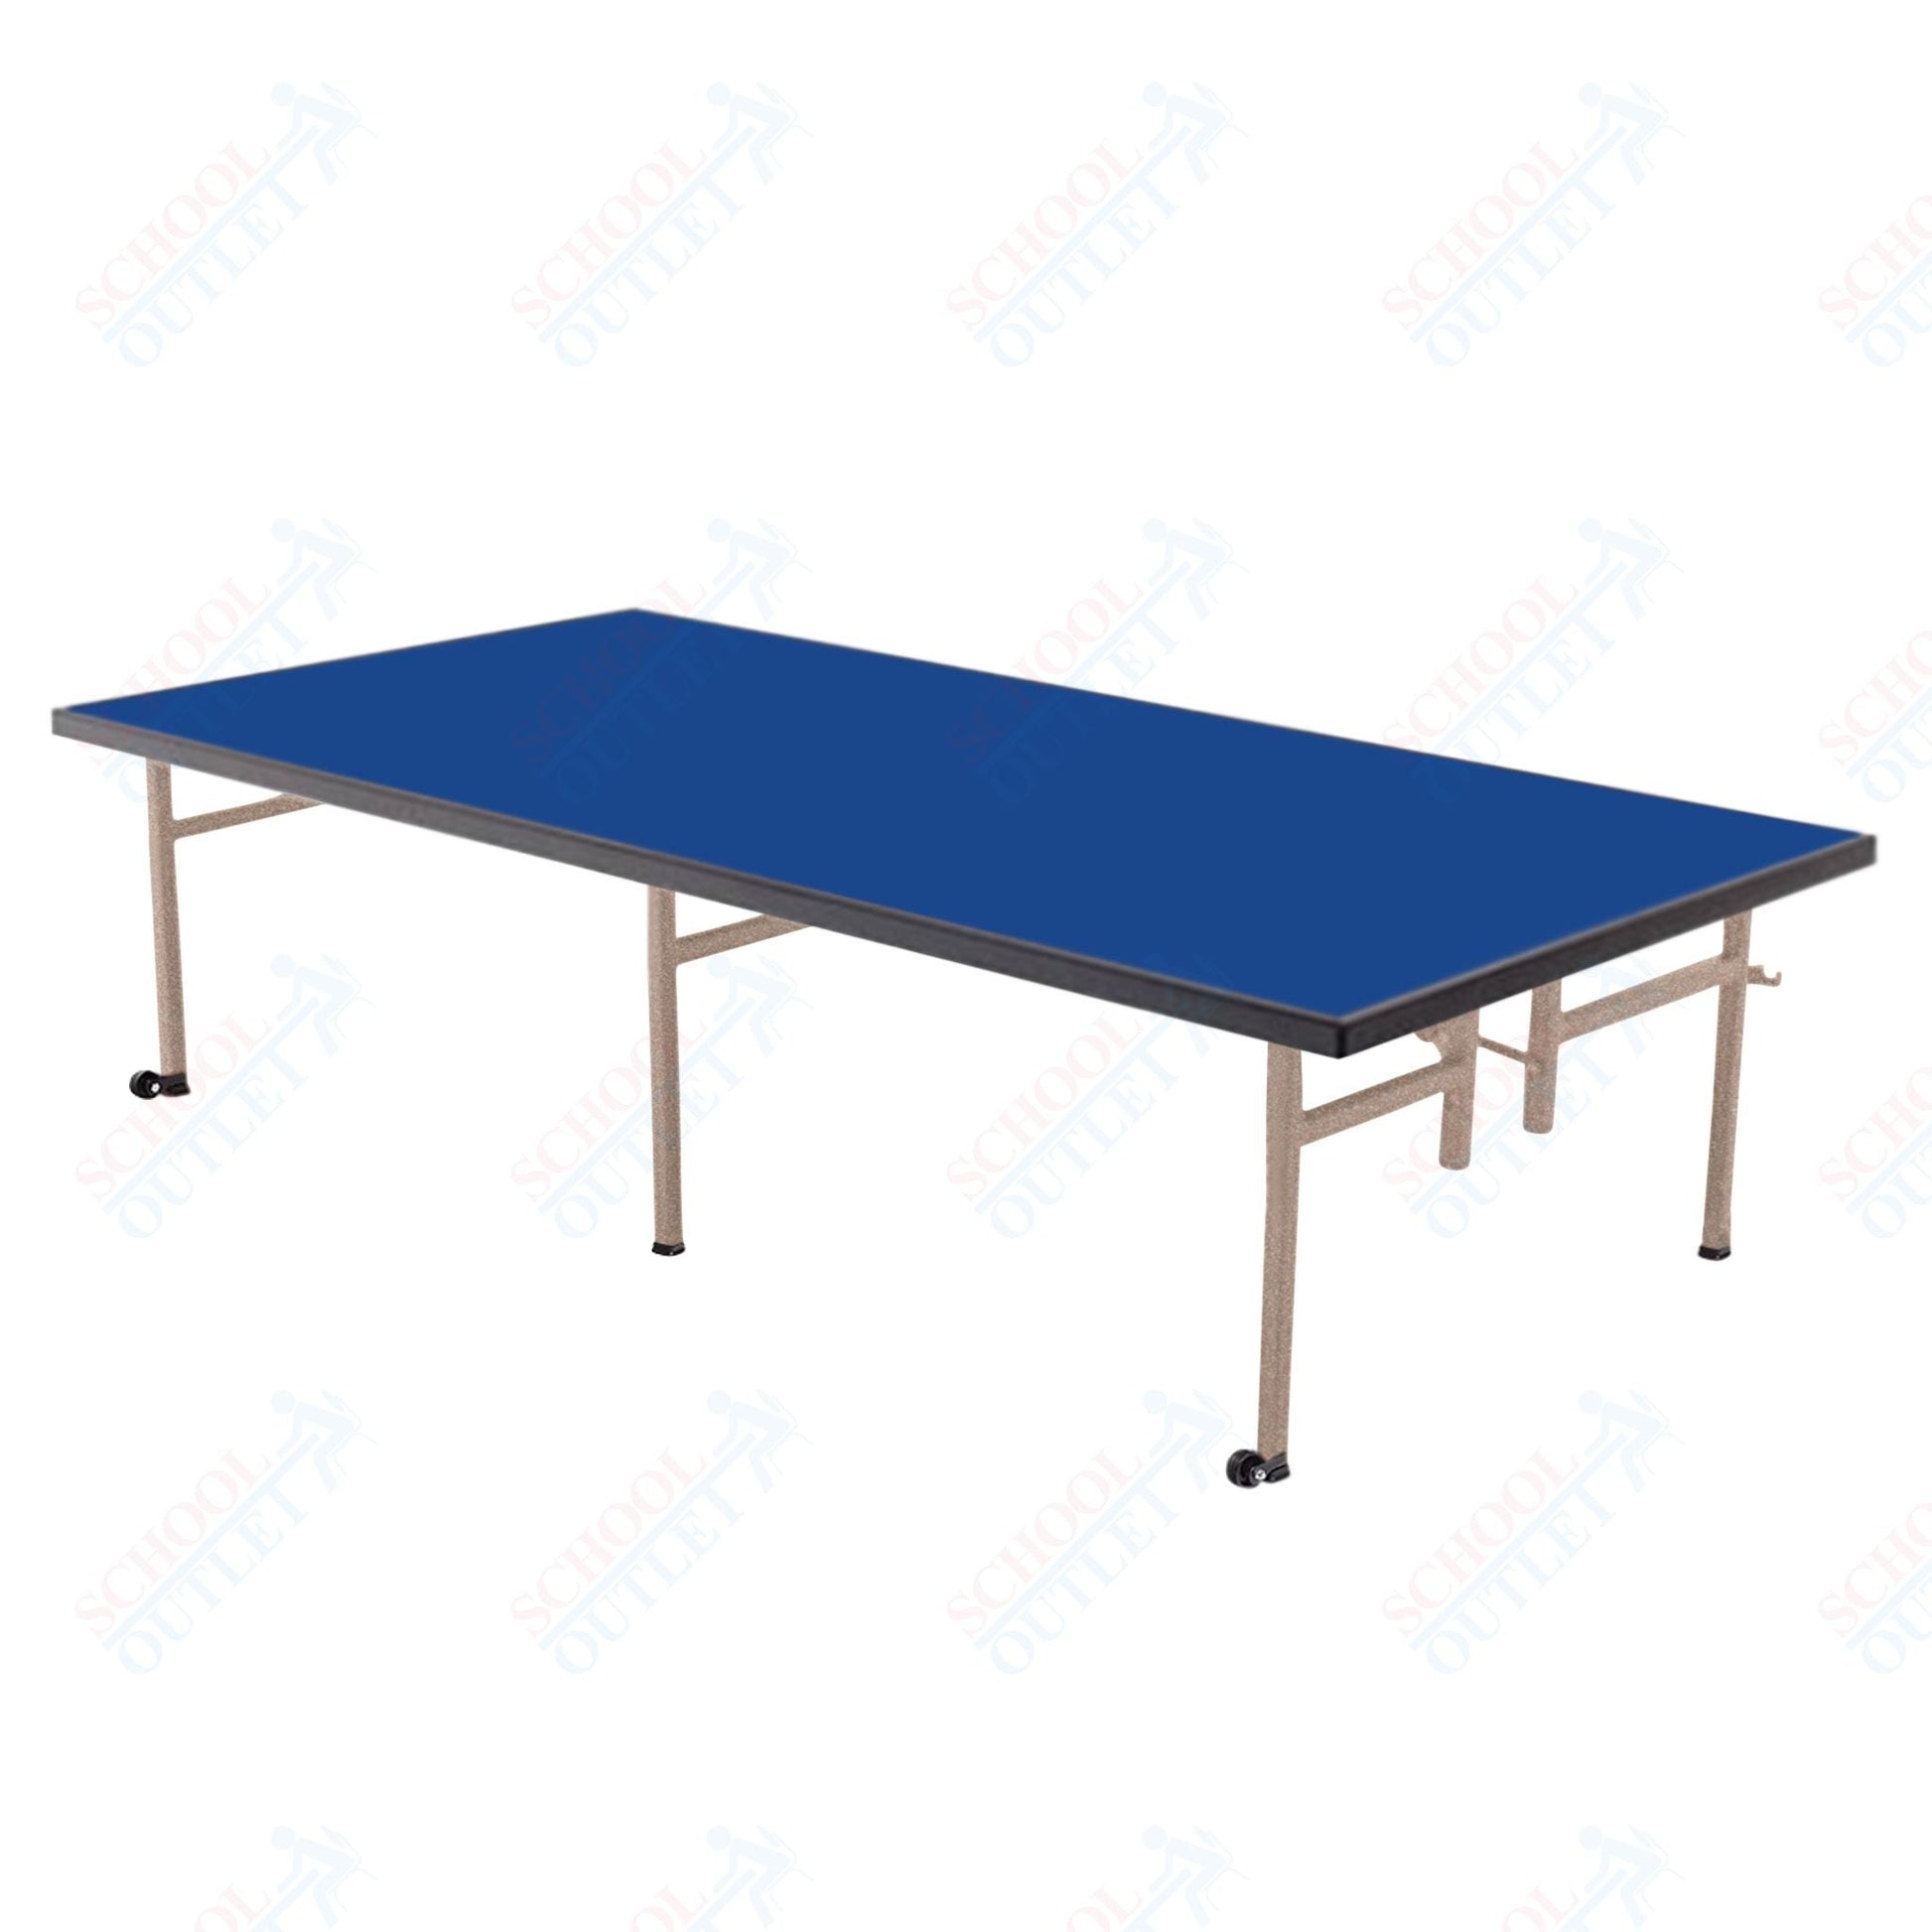 AmTab Fixed Height Stage - Carpet Top - 36"W x 72"L x 16"H (AmTab AMT - ST3616C) - SchoolOutlet